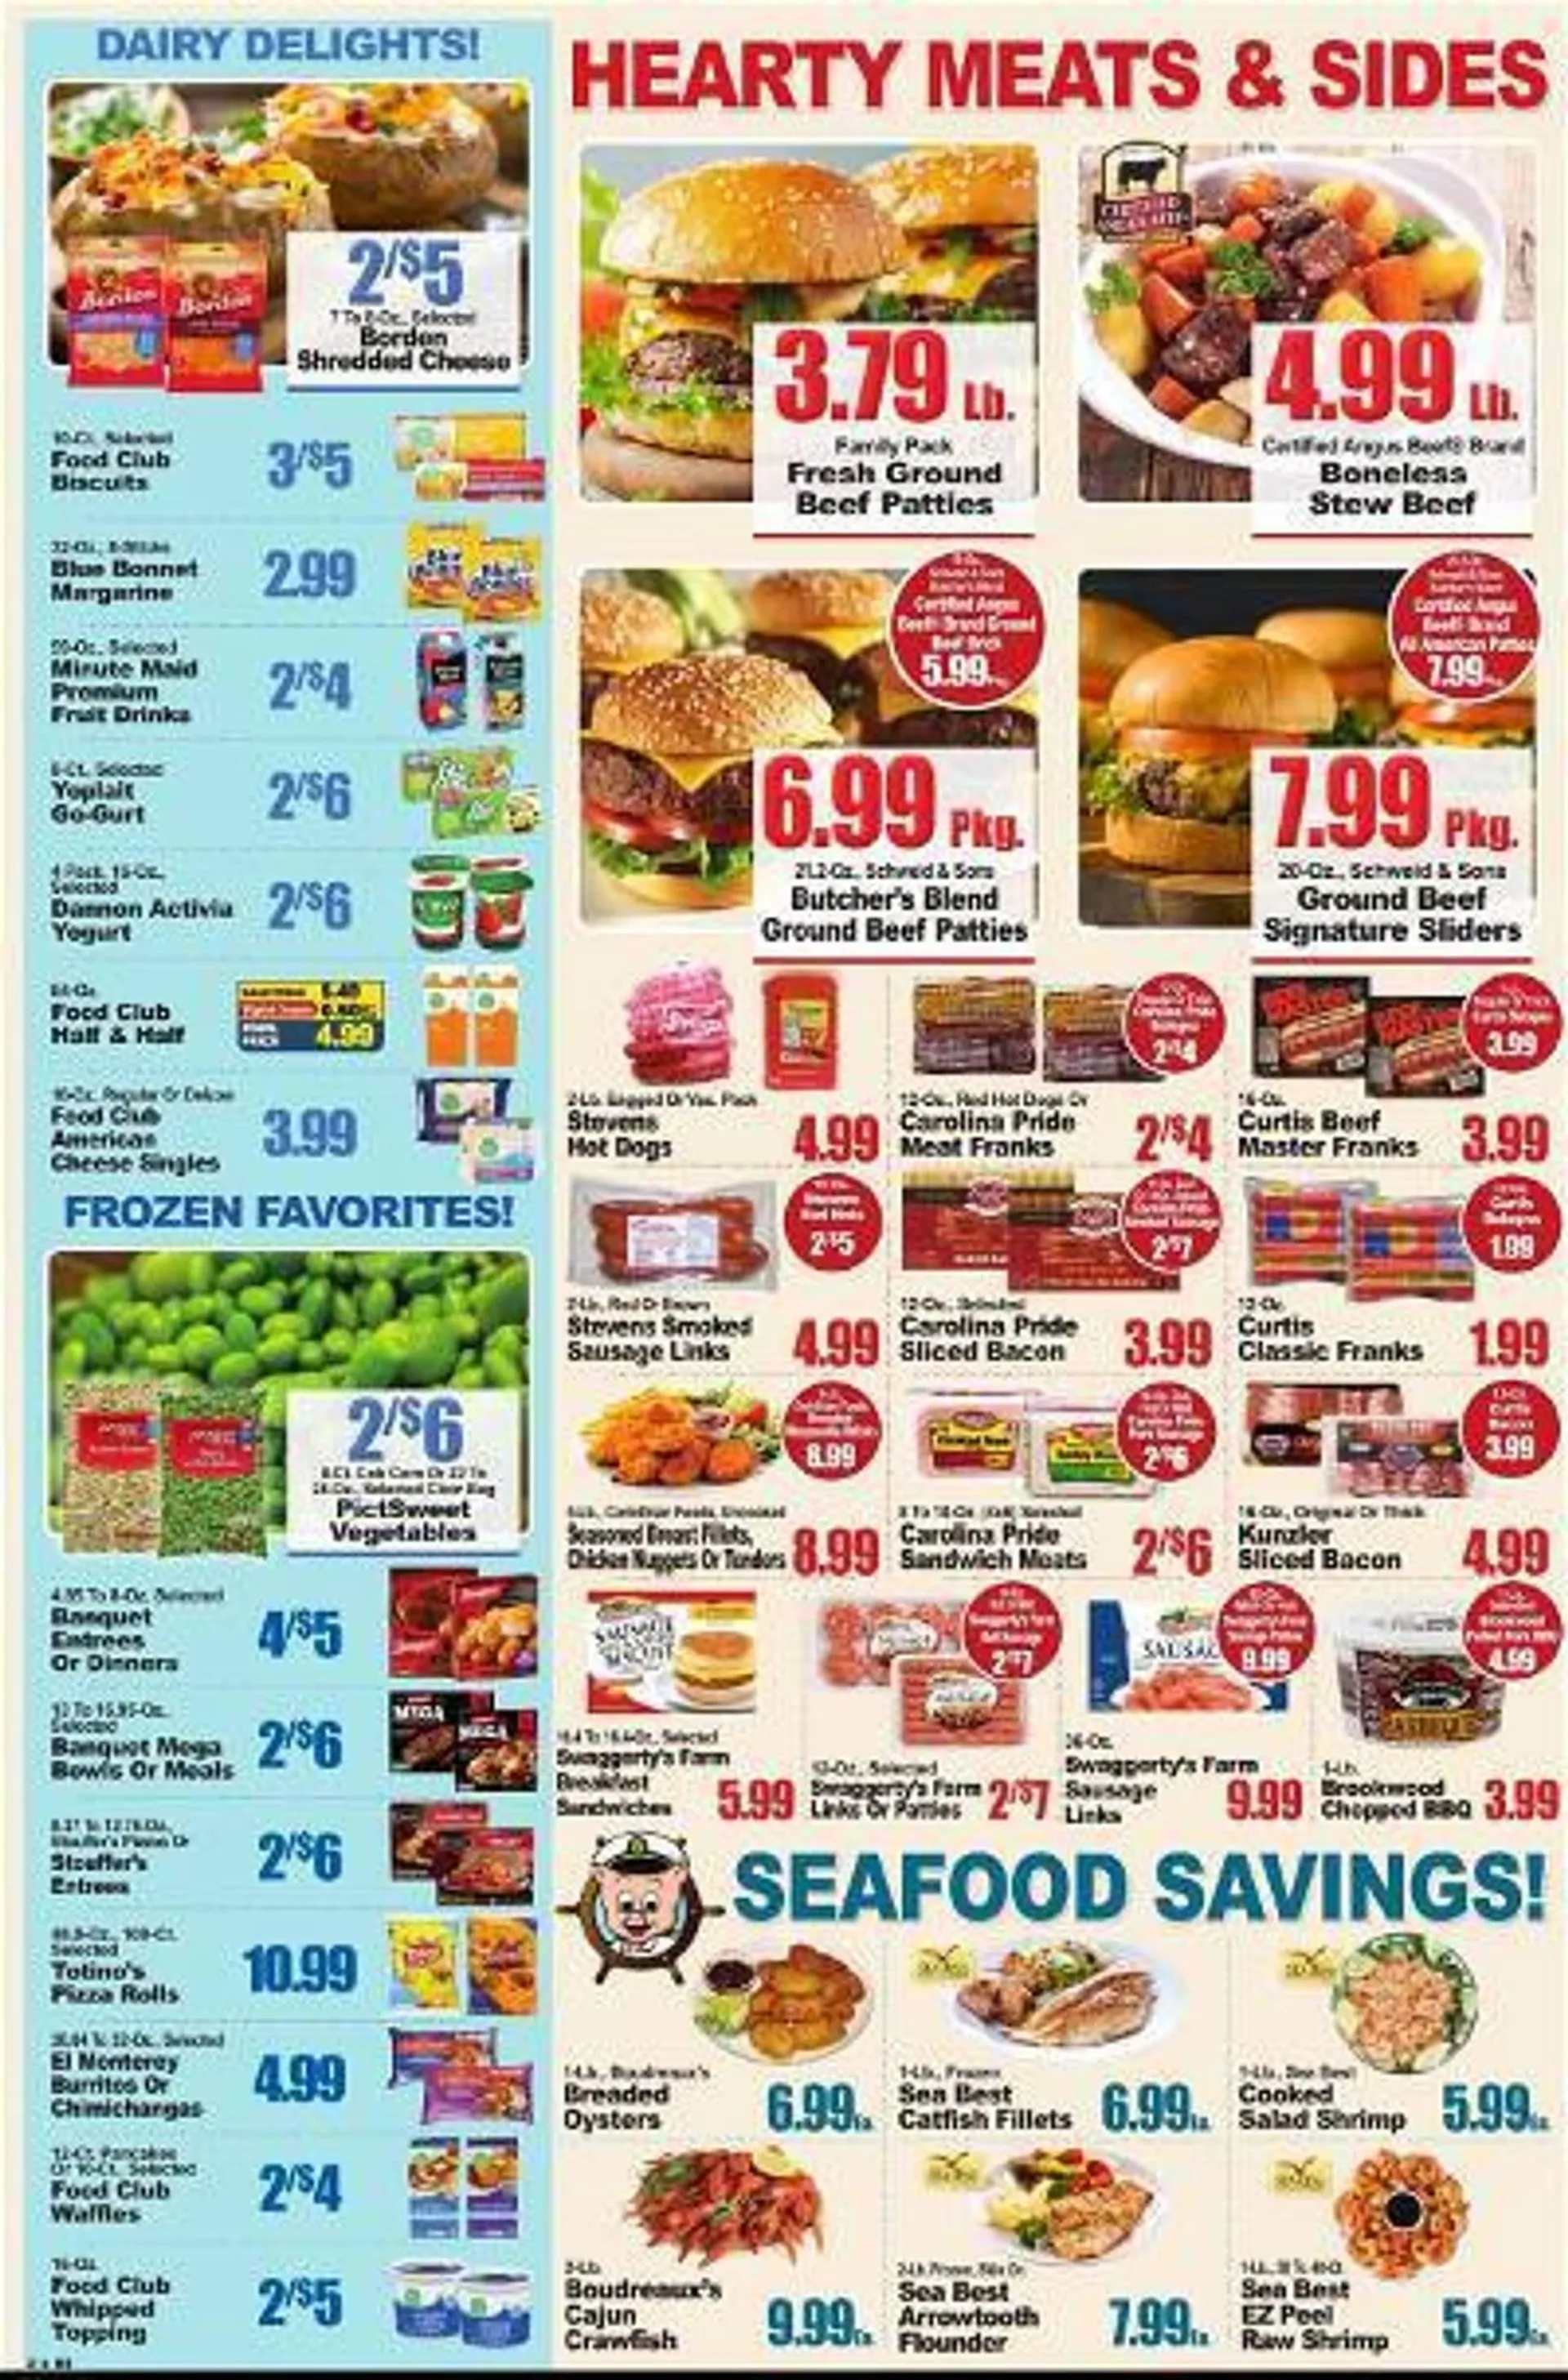 Piggly Wiggly Weekly Ad - 2